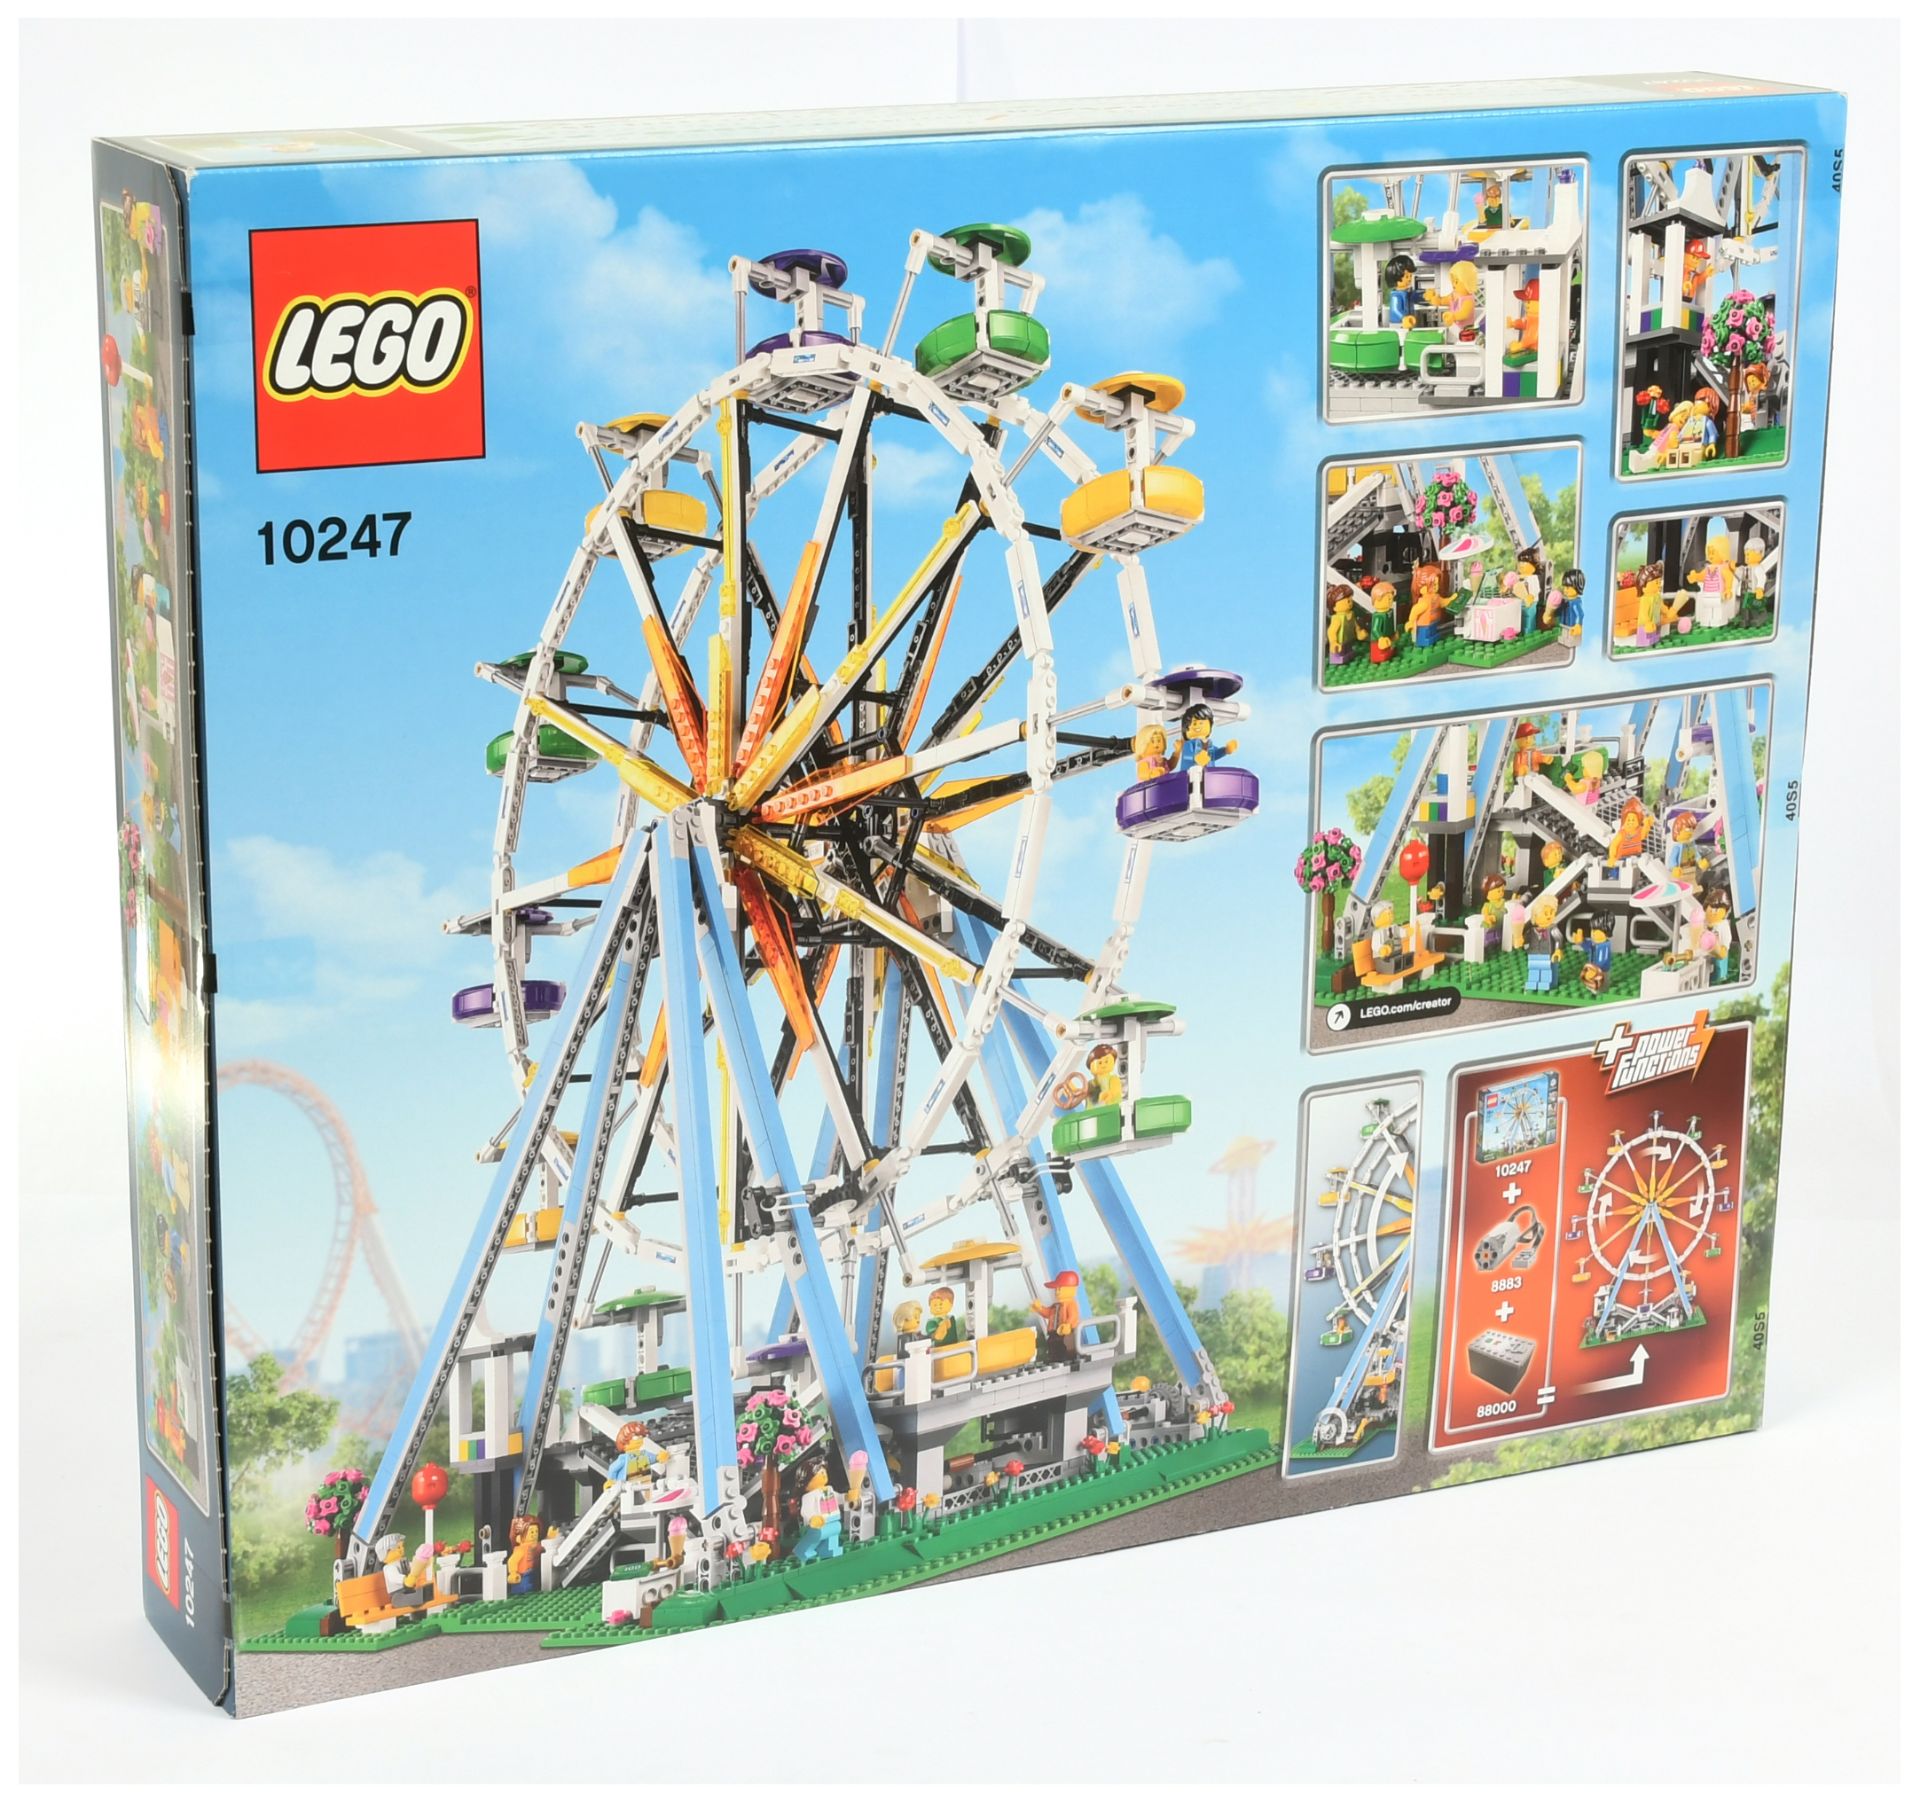 Lego Creator 10247 Ferris Wheel within Near Mint Sealed Packaging. - Image 2 of 2